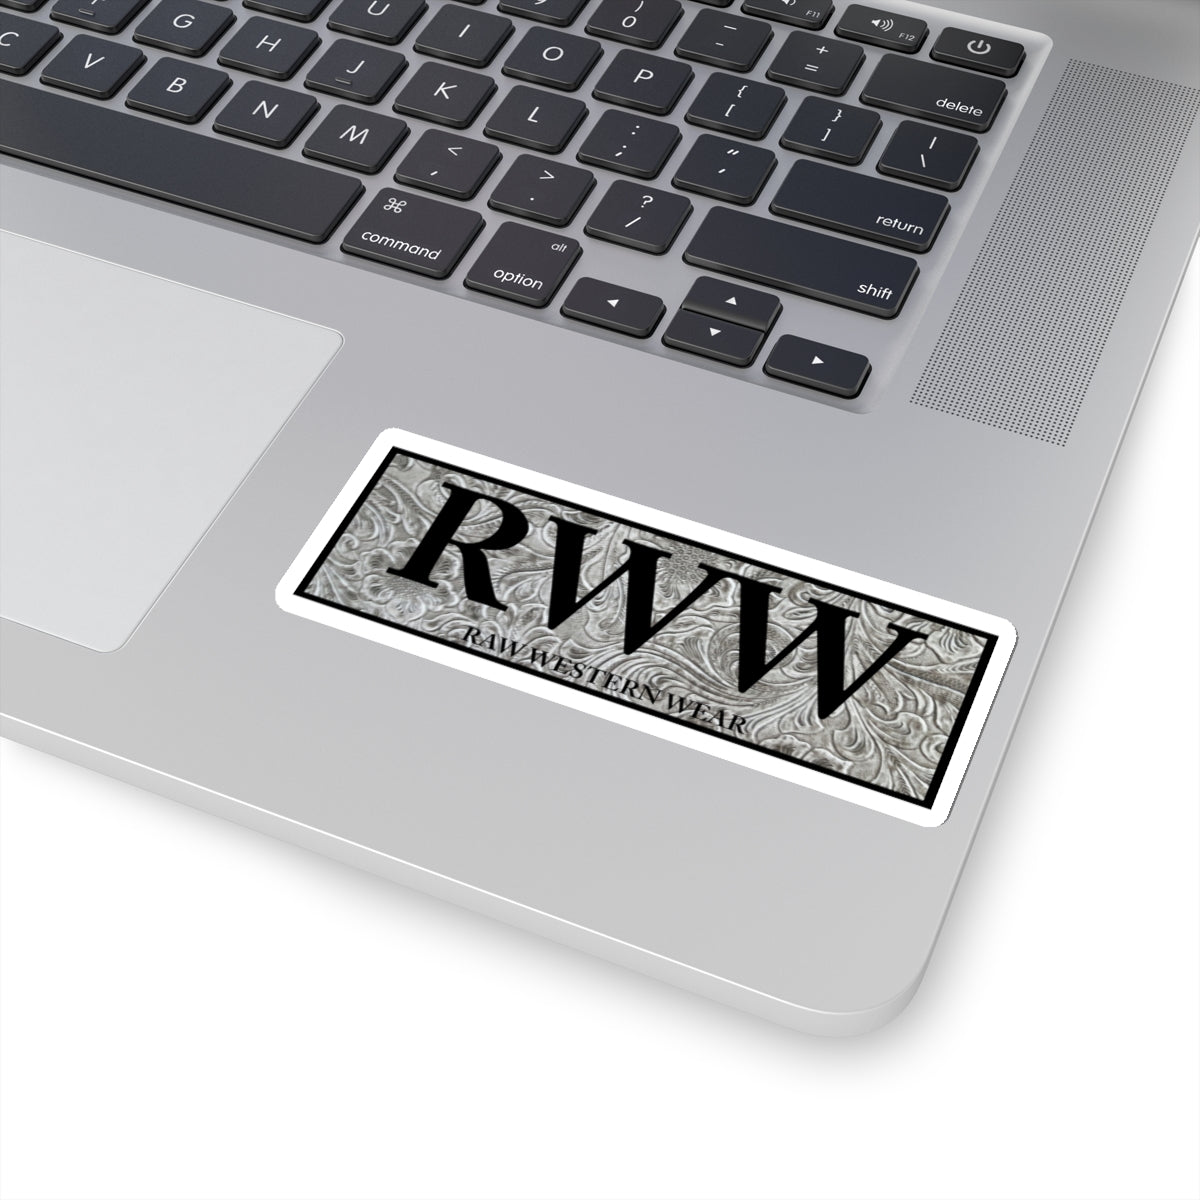 Raw Western Wear Black and White Tooled Leather Sticker